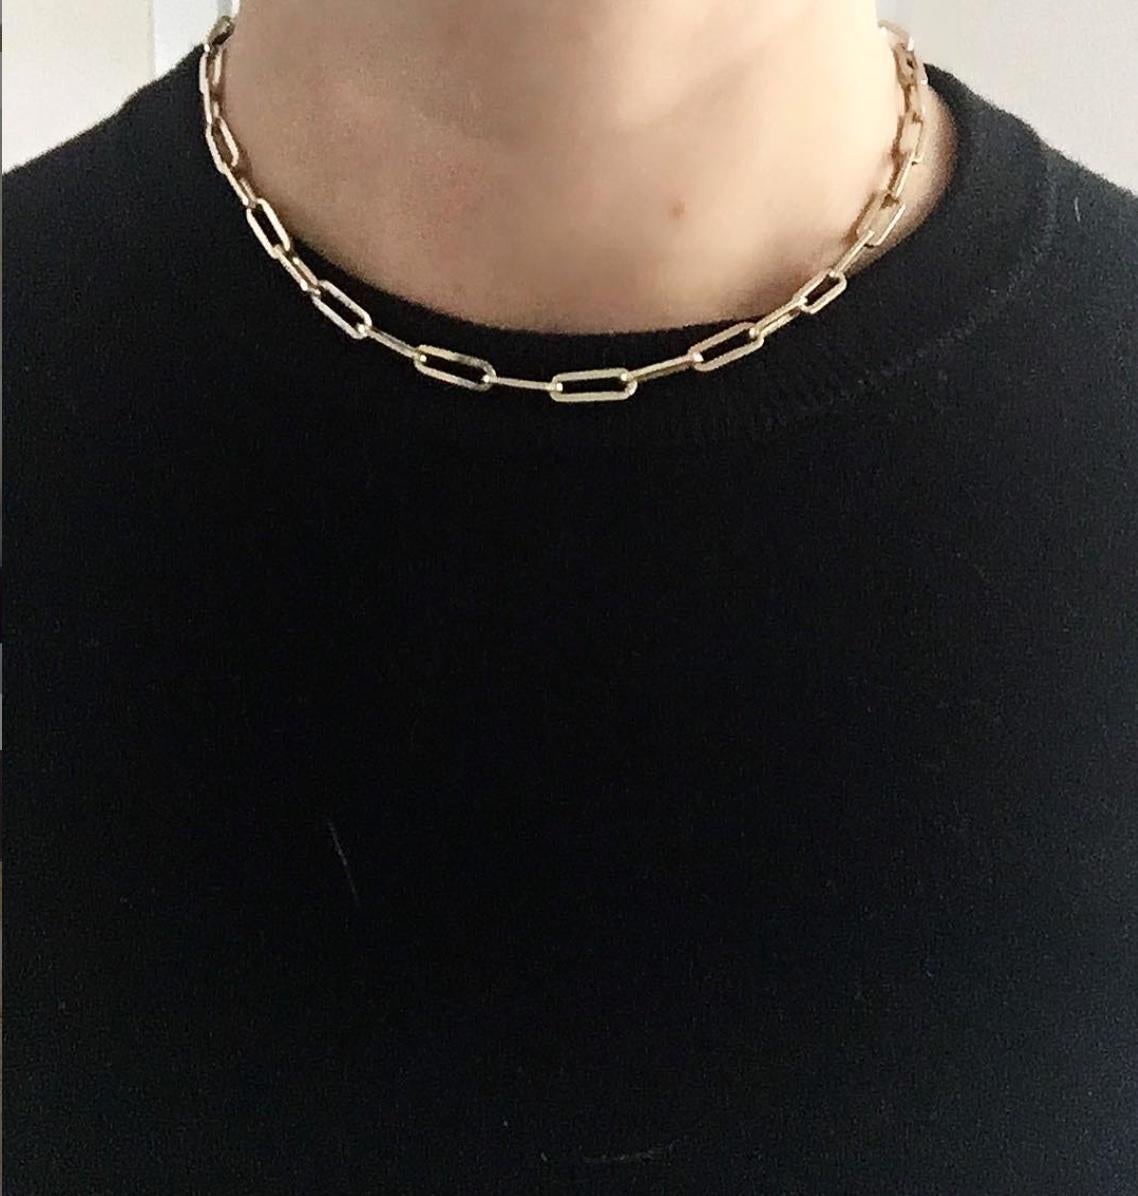 Garland Collections's custom solid gold handmade links are meticulously hand made by a master link maker in Los Angeles. Vintage inspired, but with a contemporary touch, these statement necklace chains are sleek and chic forever pieces.